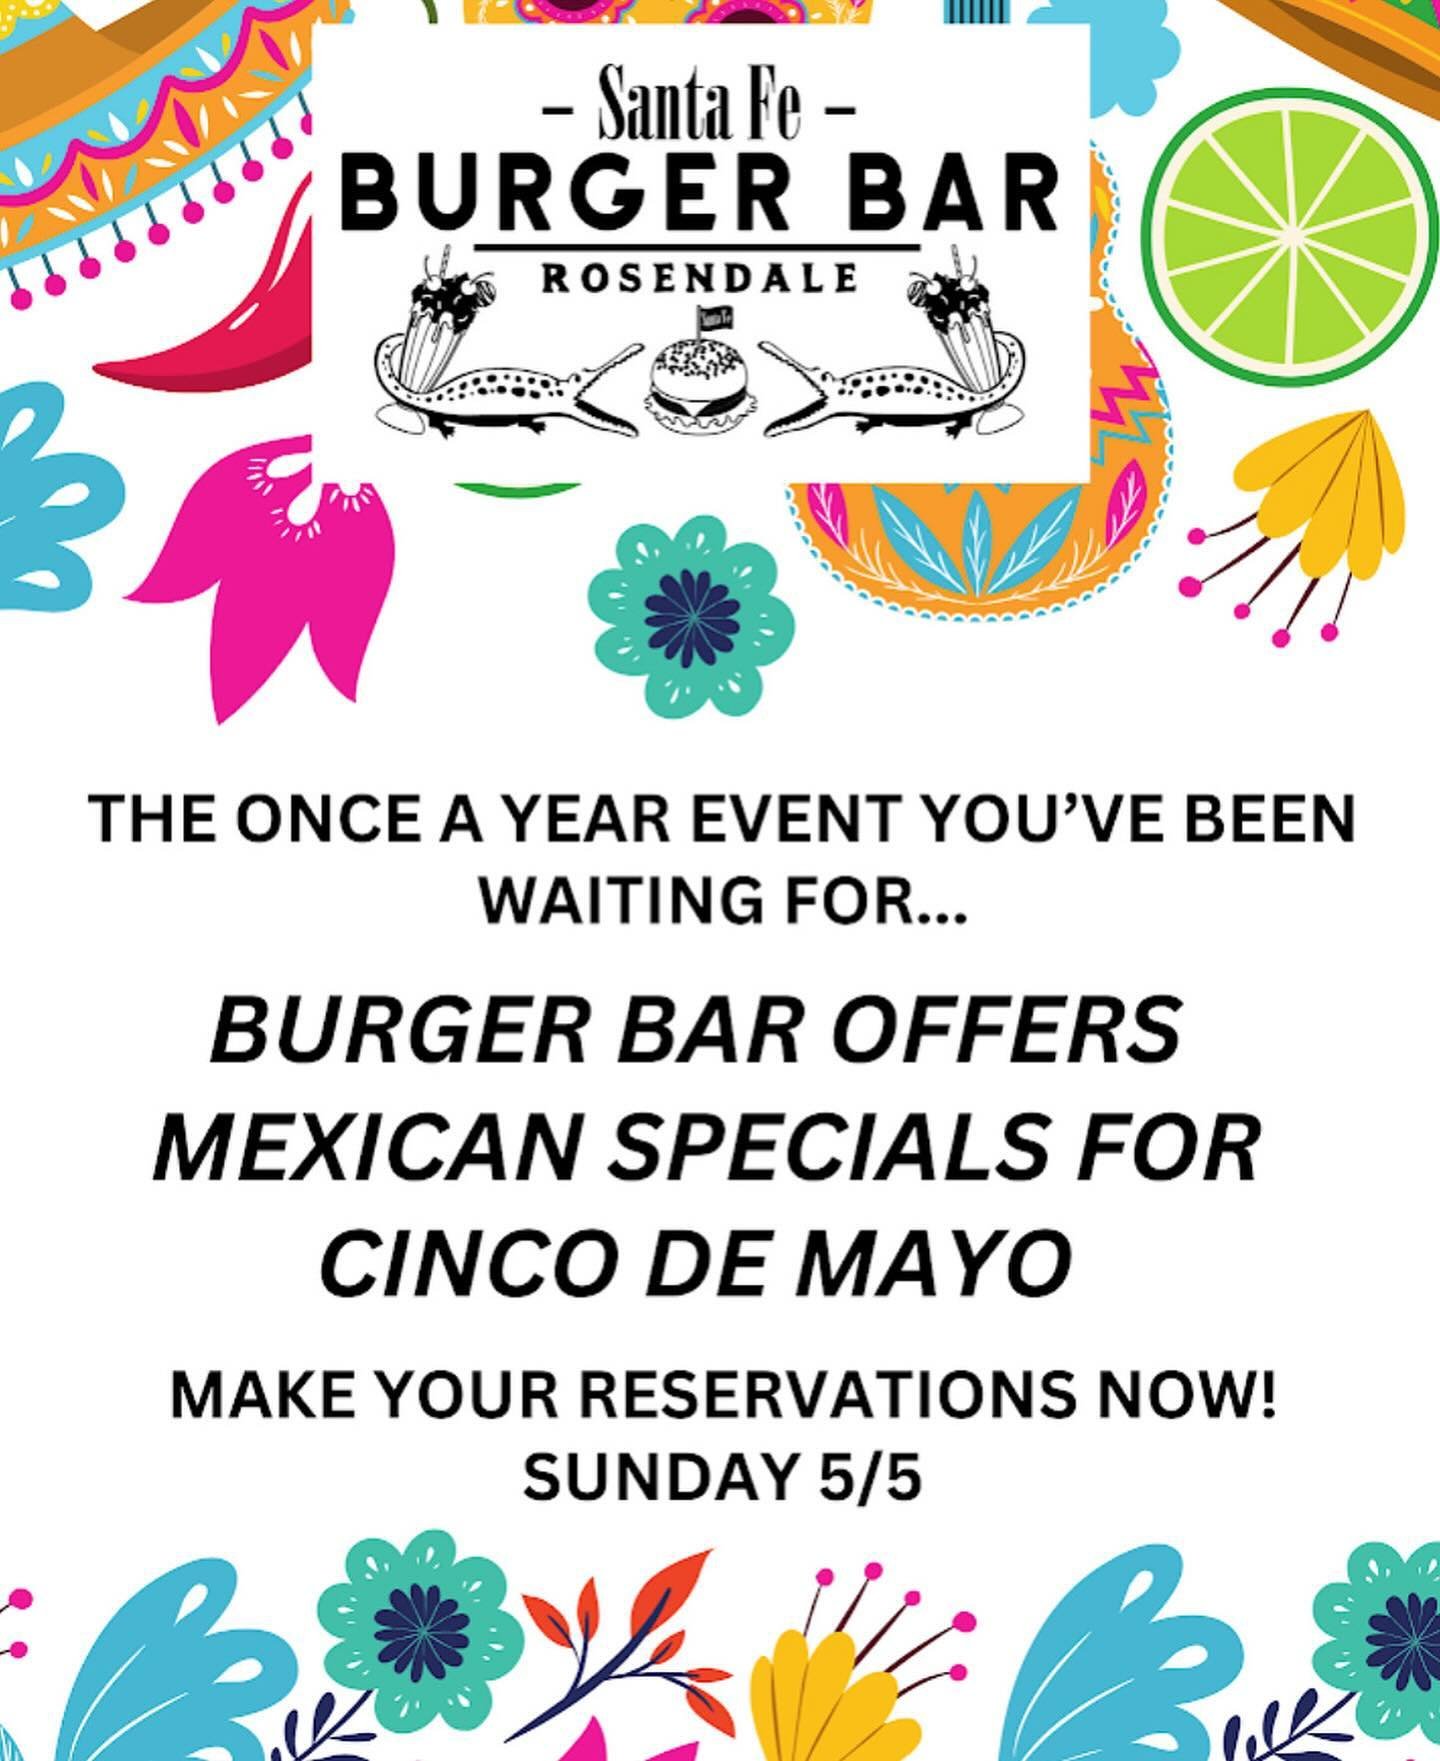 One day away from Santa Fe Mexican x Santa Fe Burger Bar. Please see our story or highlights to view full Cinco de Mayo specials menu, which we will be offering along with all our regular favorite! Mark your calendars&hellip;#cincodemayo #tacos #tequ